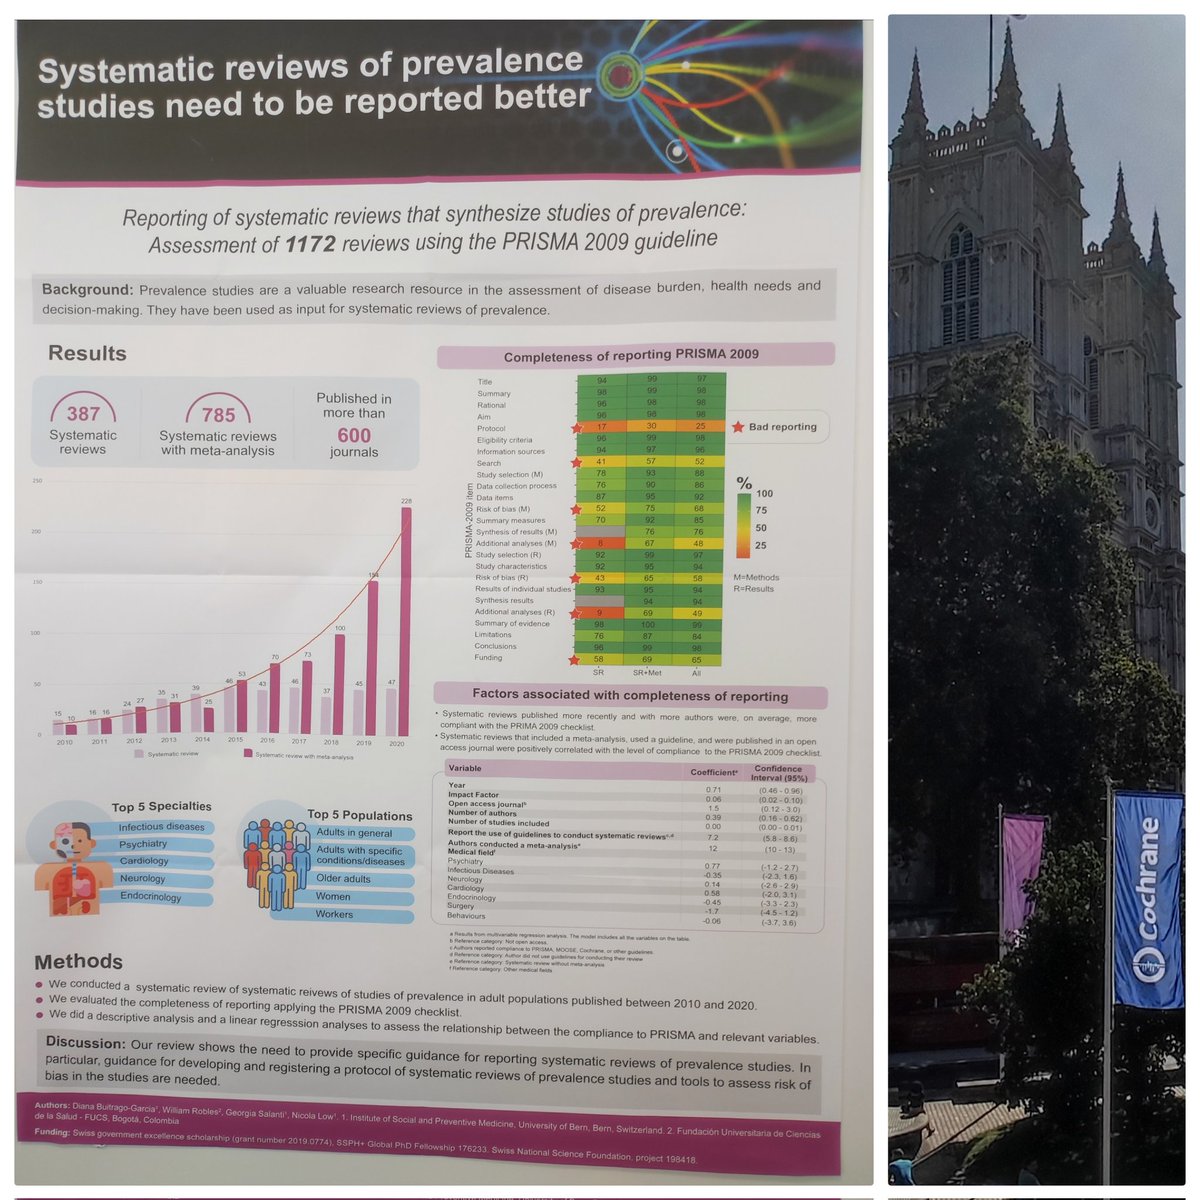 Today at #CochraneLondon 
presenting our poster #2 on the reporting of systematic reviews of prevalence 🤓🤩 #prevalencematters !